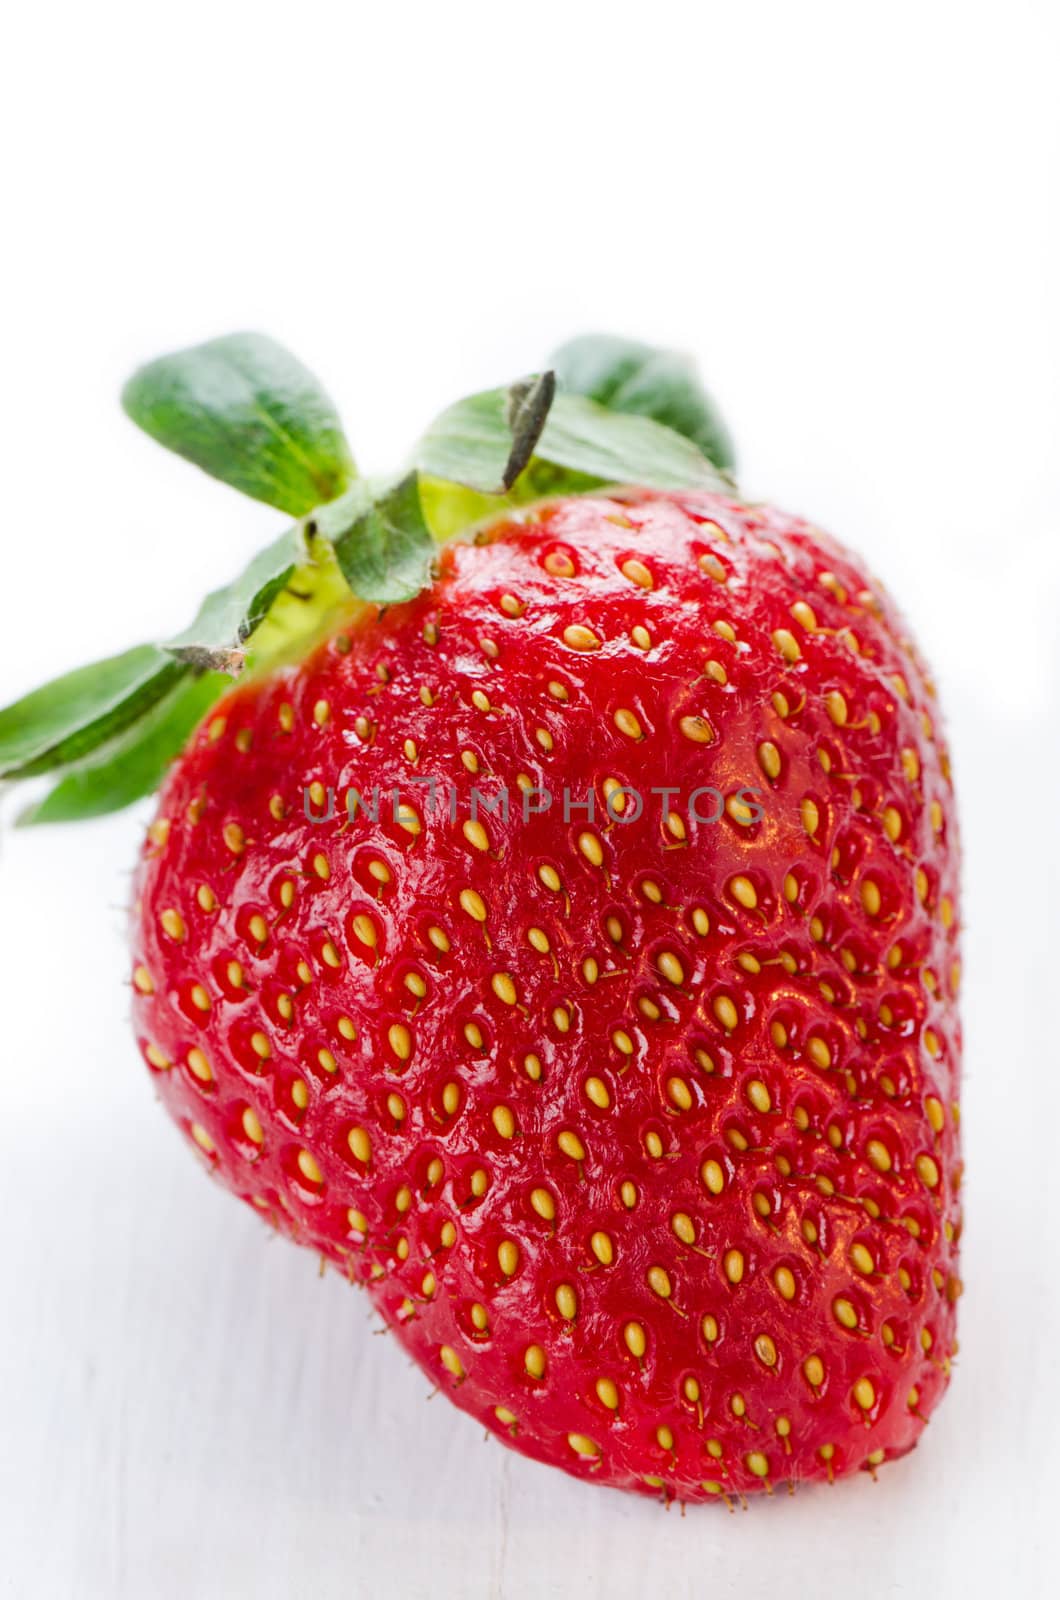 Strawberry on white wooden table